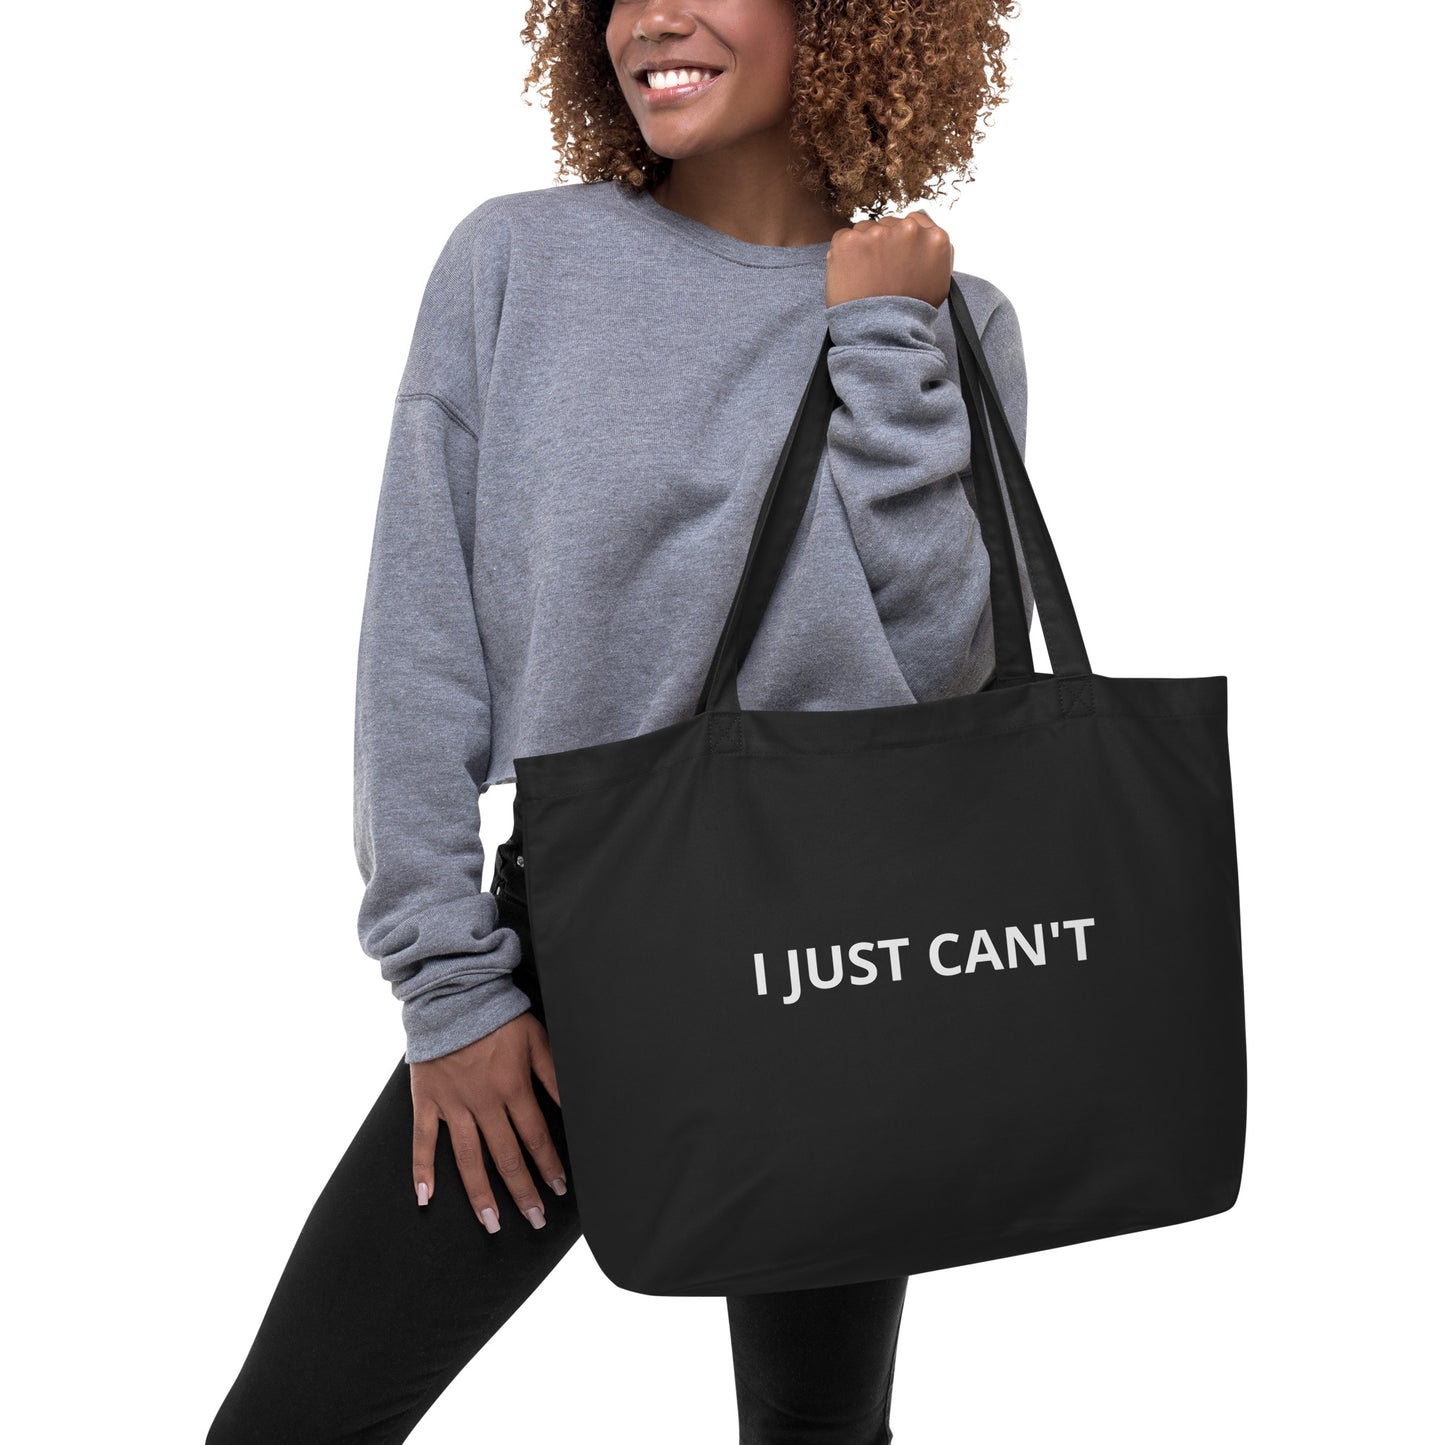 I JUST CAN'T Large organic tote bag